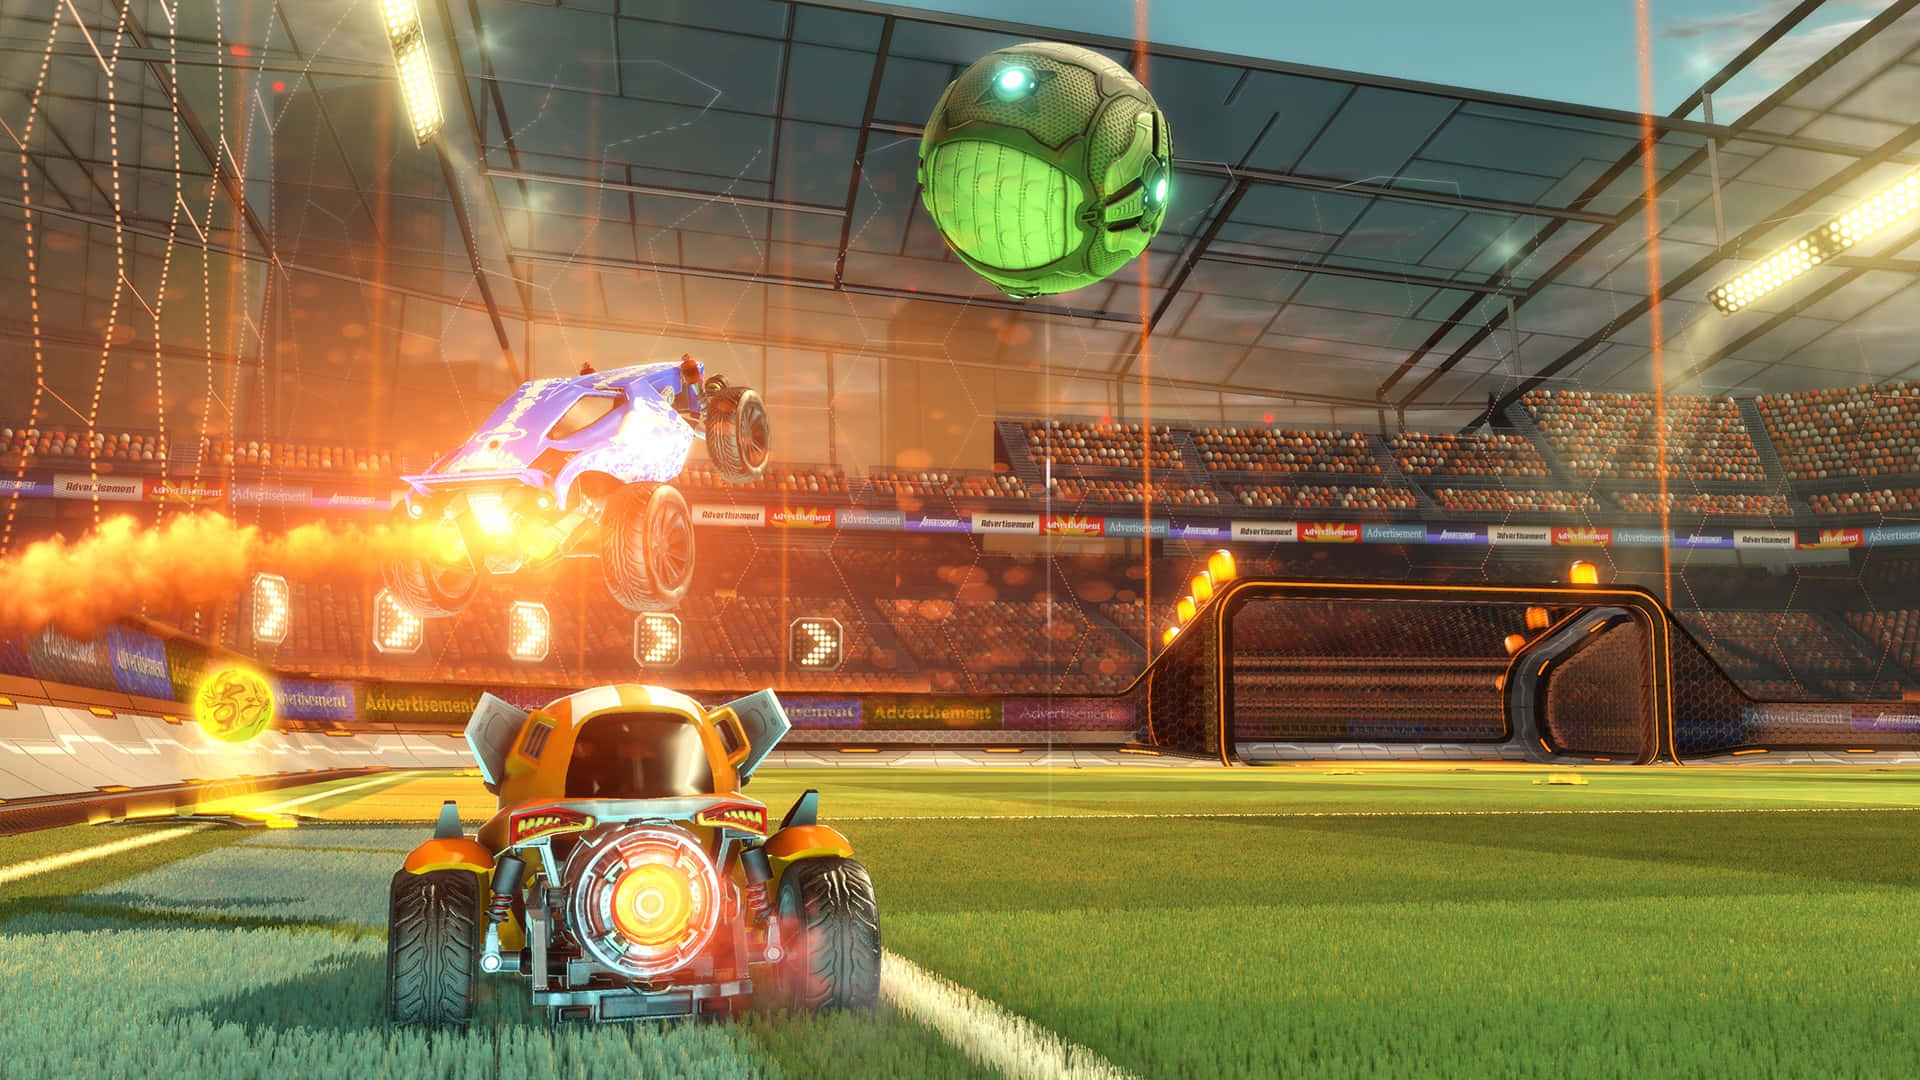 Race to the finish with in-game goals in 1080p Rocket League